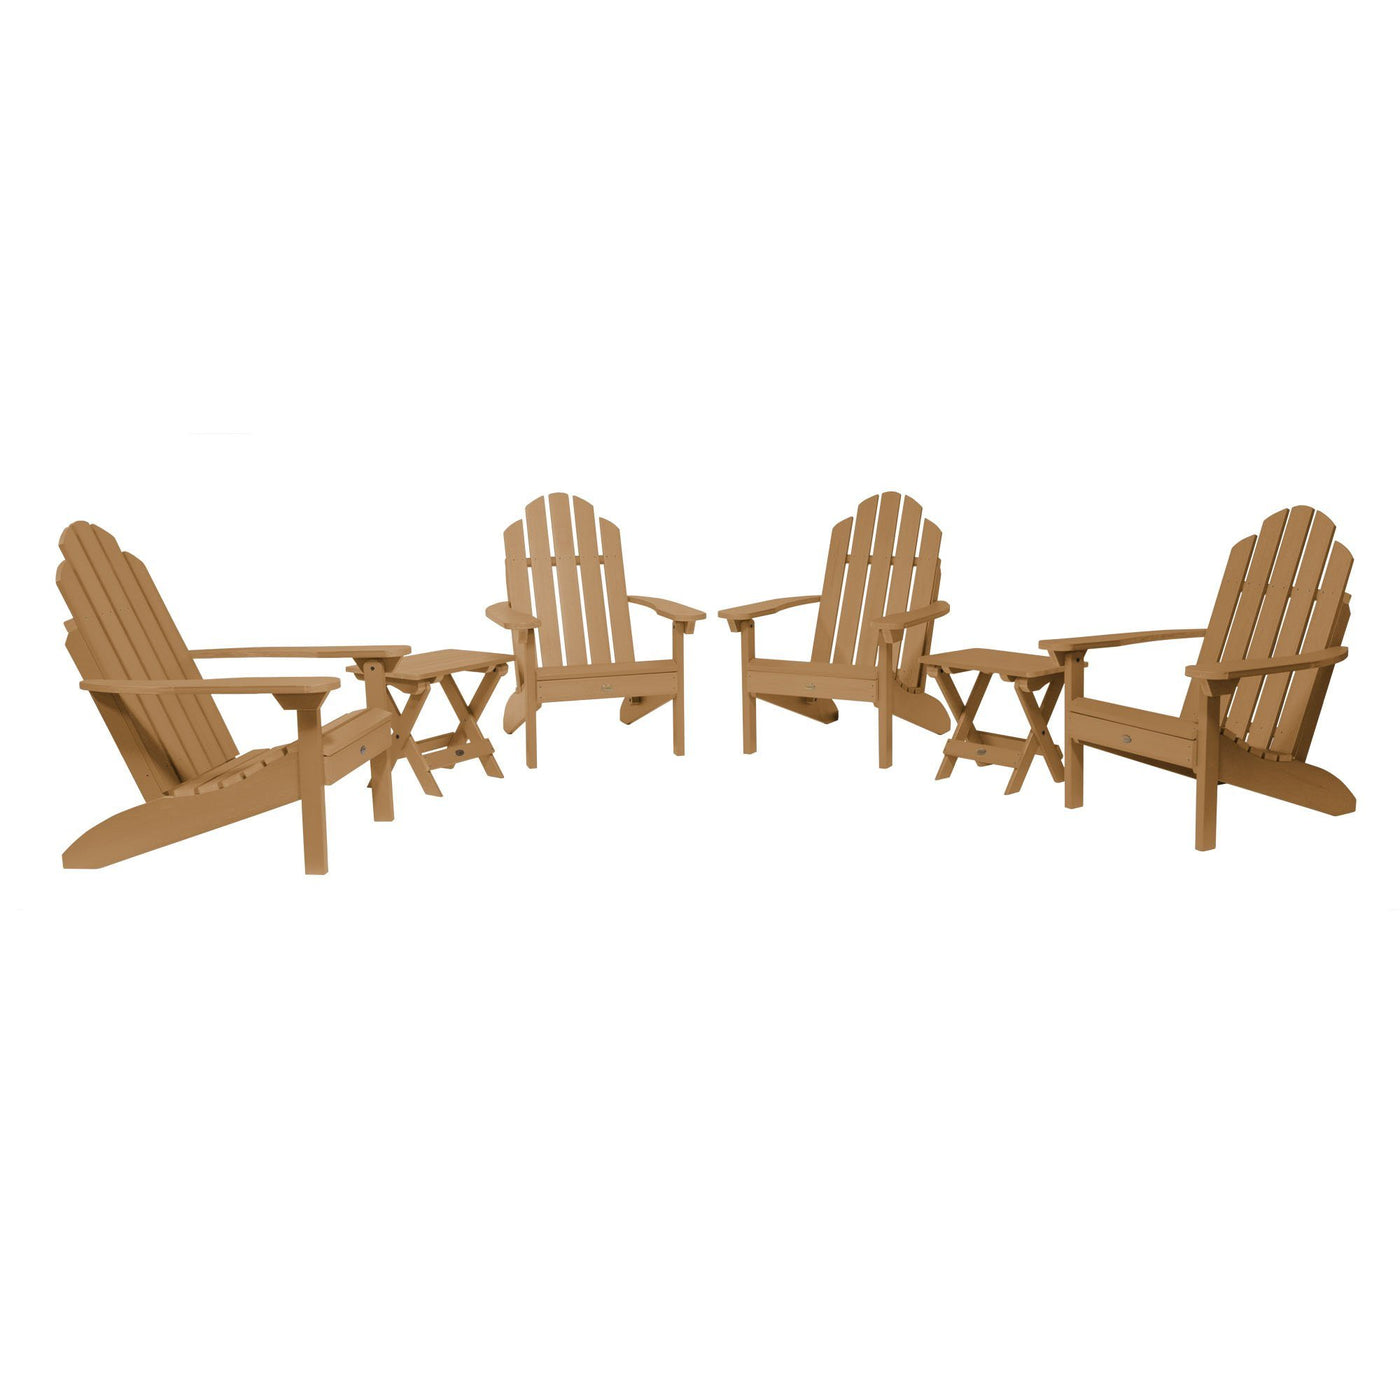 4 Classic Westport Adirondack Chairs with 2 Folding Side Tables Highwood USA Toffee 